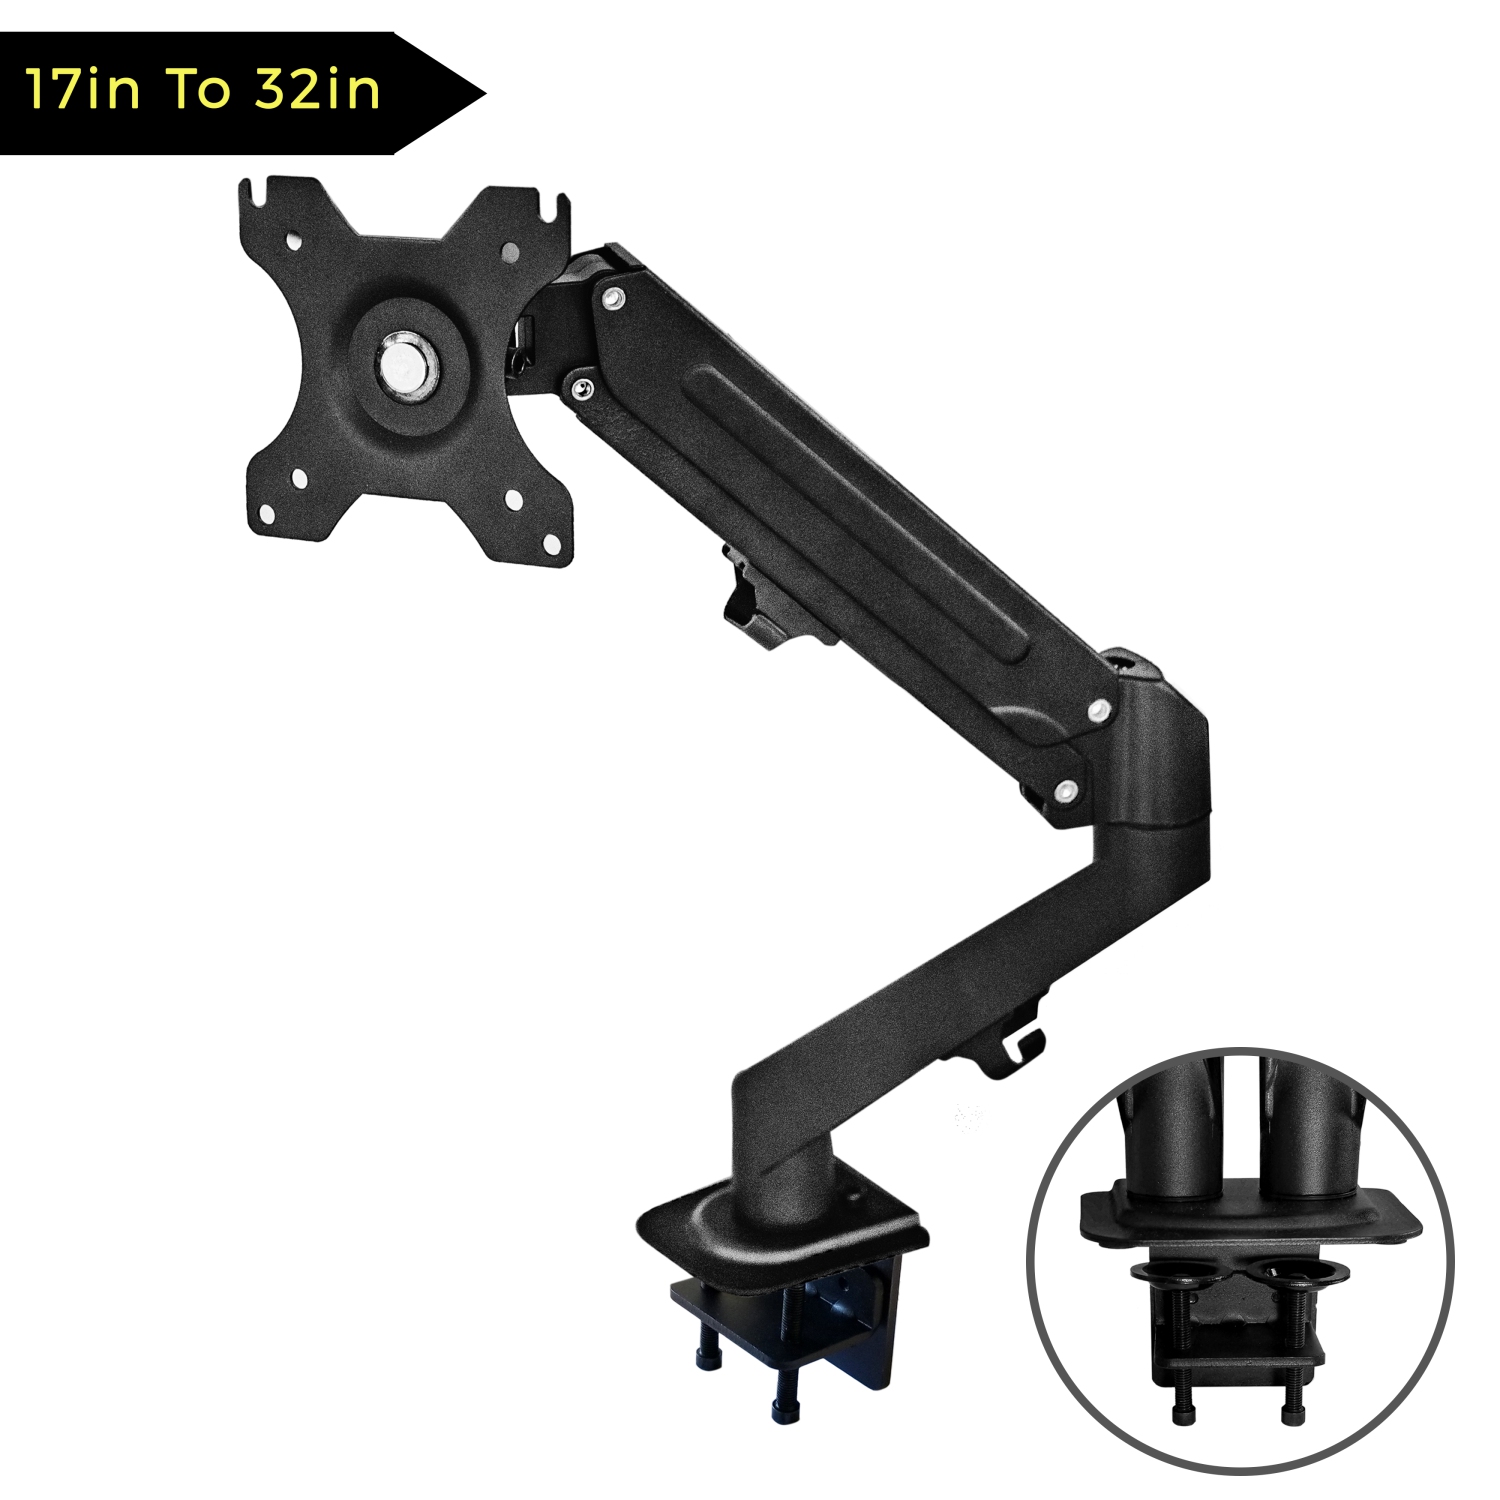 MotionGrey Single Metal Computer Monitor Arm Stand Universal Vesa Mount Installation for up to 28 inch screen - Black Arms